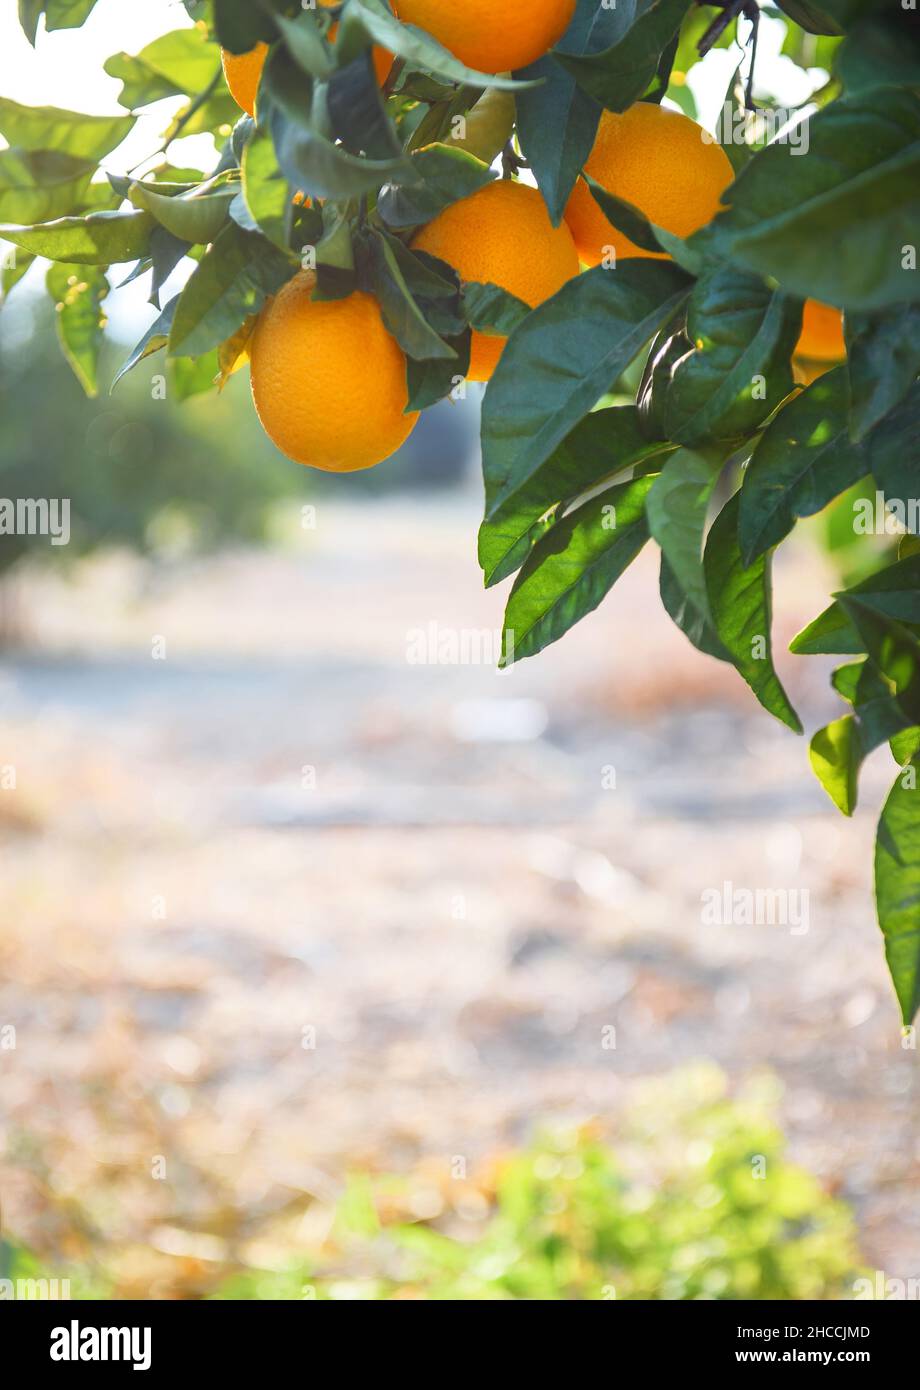 Orange fruits hanging on a tree branch on a garden, selective focus, vertical shot Stock Photo